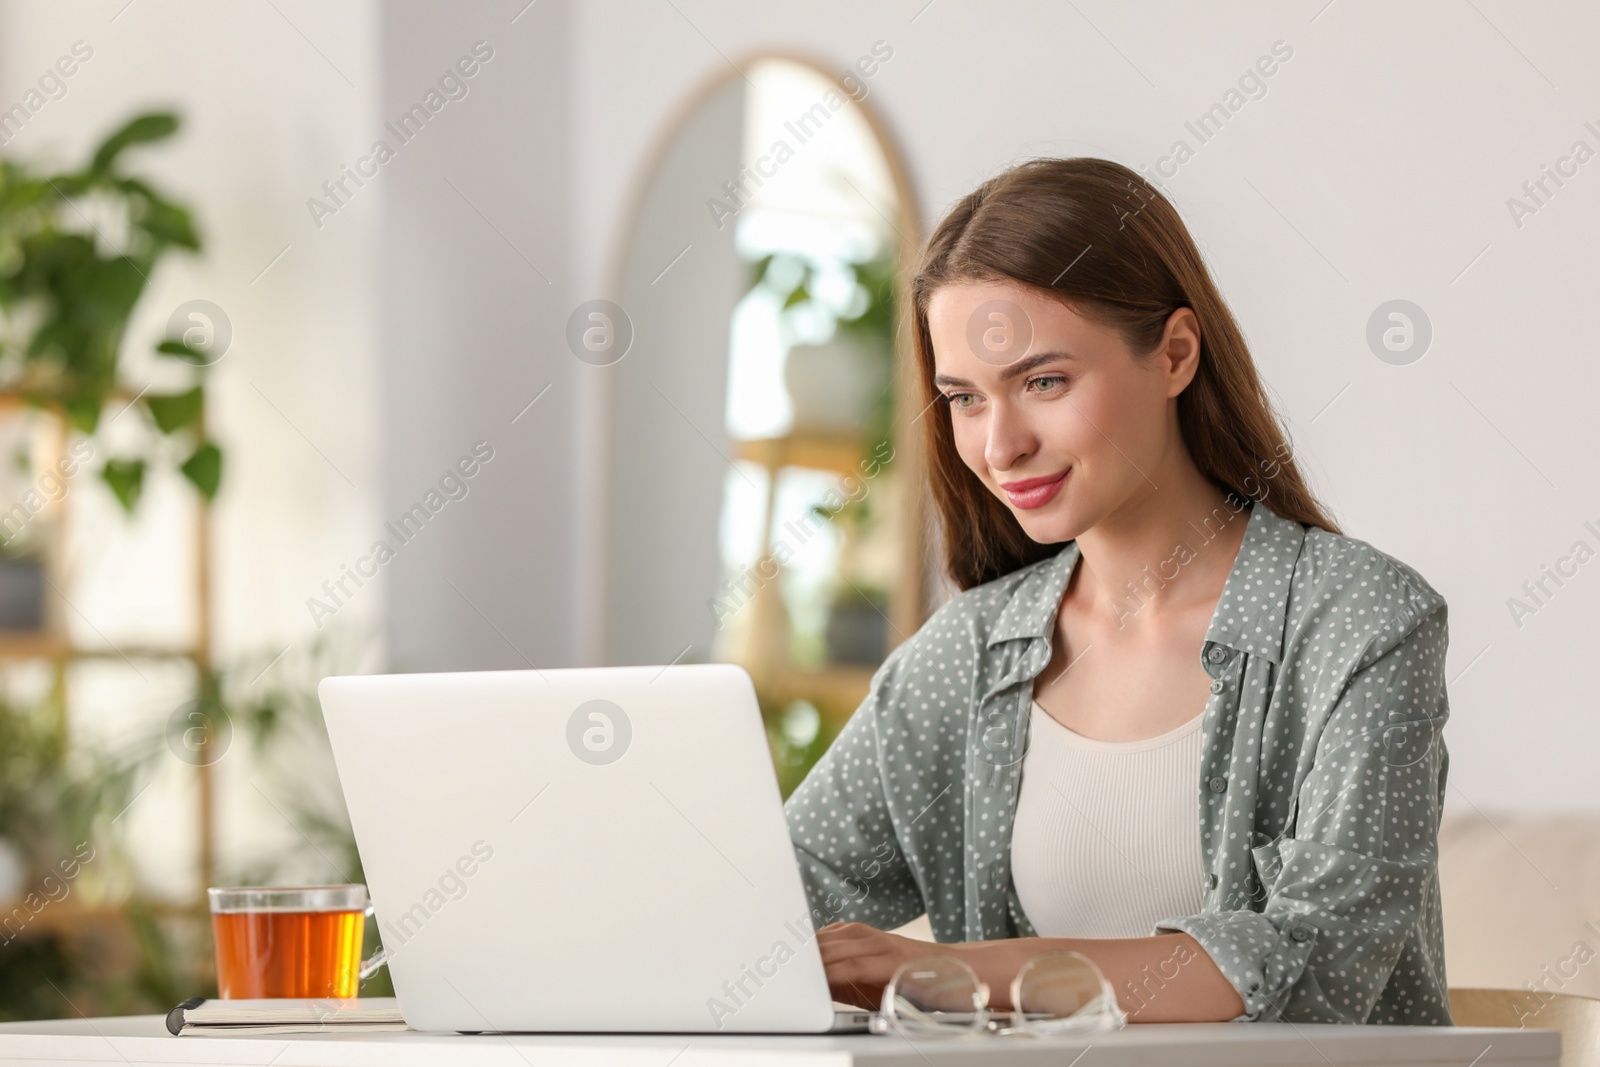 Photo of Happy young woman with laptop and tea at table indoors